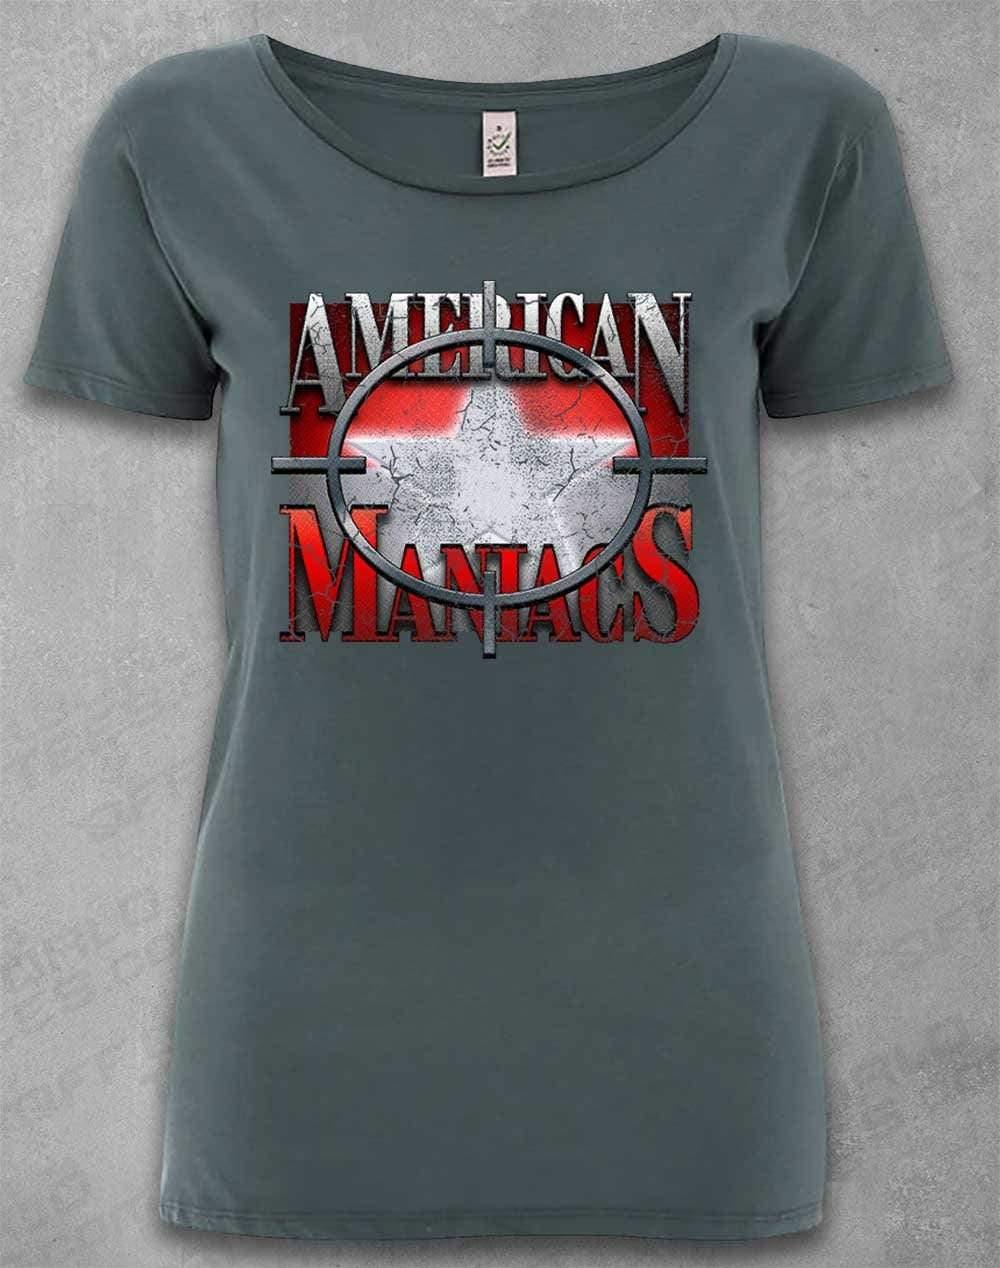 DELUXE American Maniacs - Organic Scoop Neck T-Shirt 8-10 / Light Charcoal  - Off World Tees